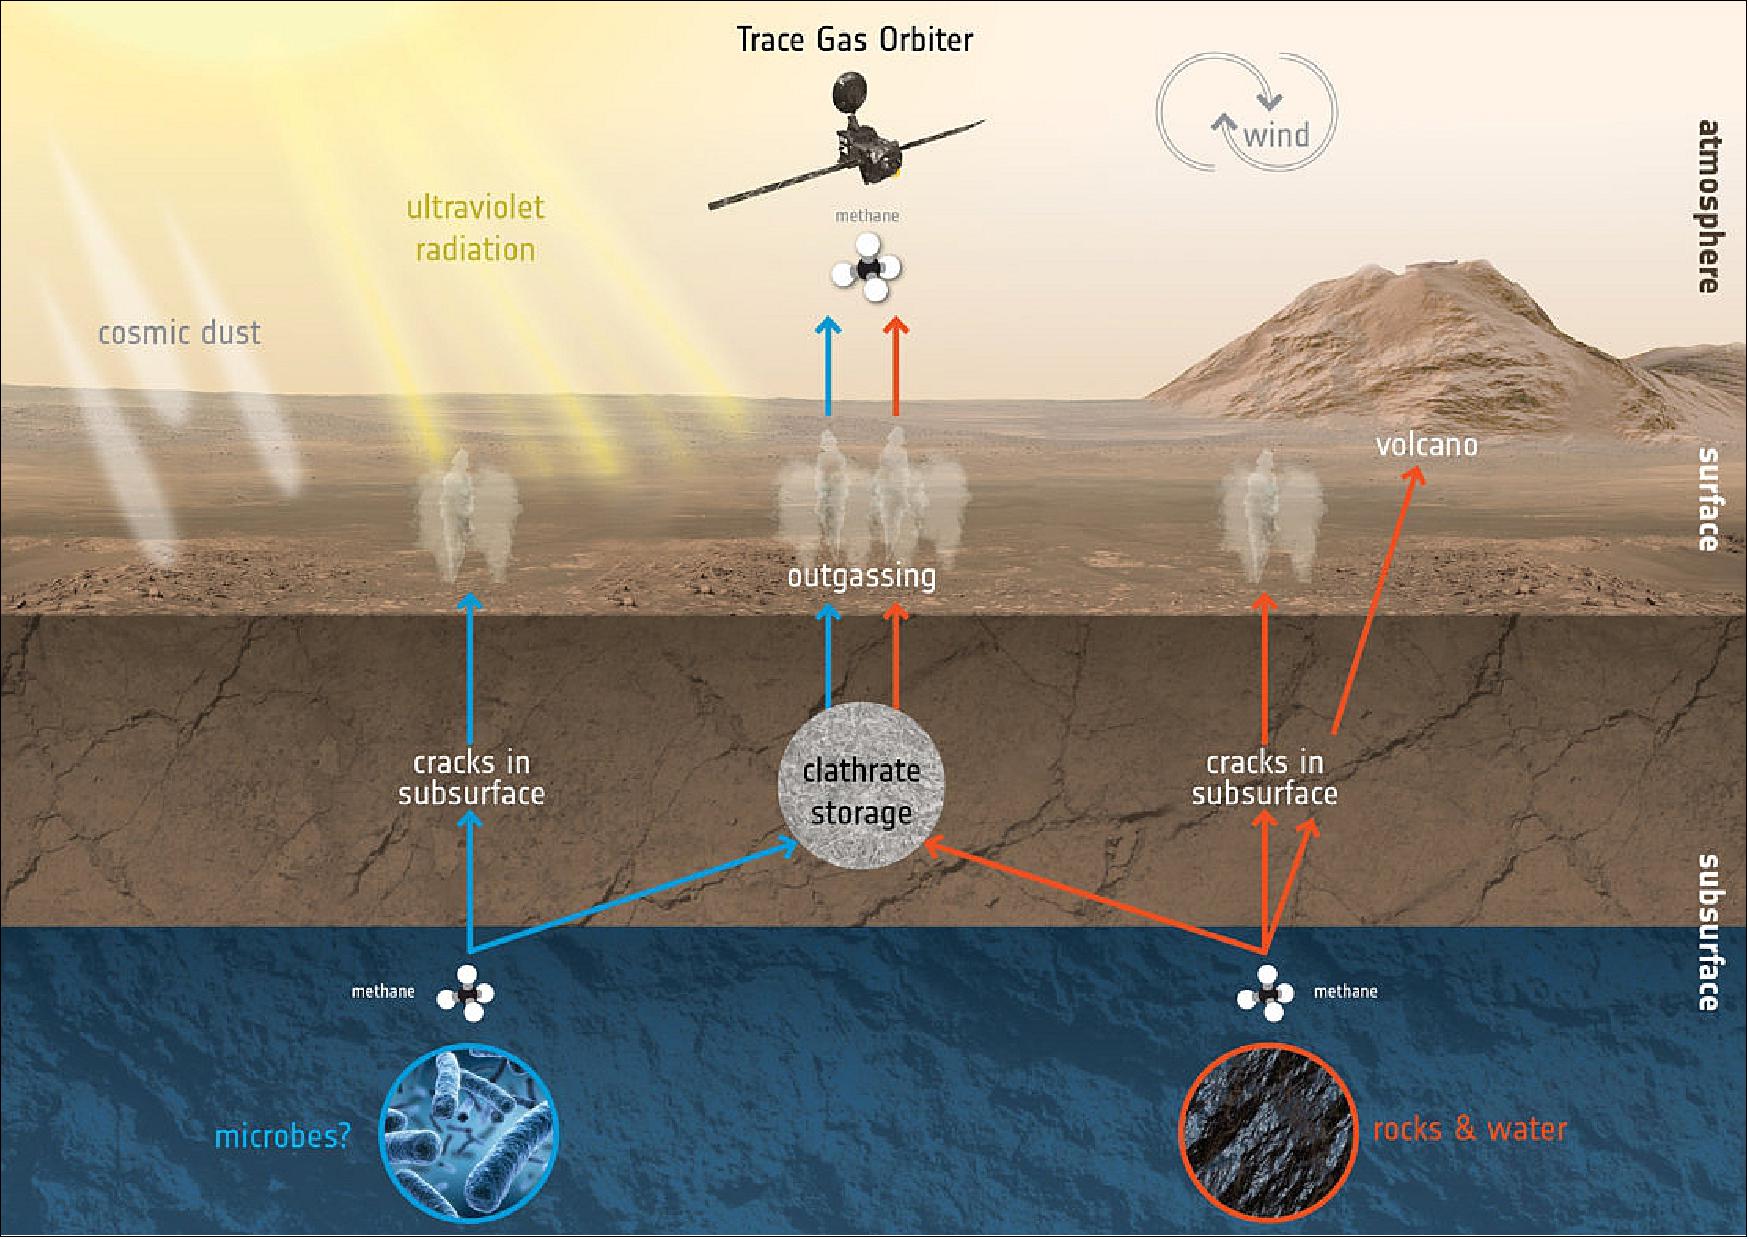 Figure 94: The ExoMars Trace Gas Orbiter is set to analyze the martian atmosphere, in particular trace gases like methane. Although making up a very small amount of the overall atmospheric inventory, methane in particular holds key clues to the planet’s current state of activity. This graphic depicts some of the possible ways methane might be added or removed from the atmosphere. One exciting possibility is that methane is generated by microbes. If buried underground, this gas could be stored in lattice-structured ice formations known as clathrates, and released to the atmosphere at a much later time (image credit: ESA/ATG medialab)